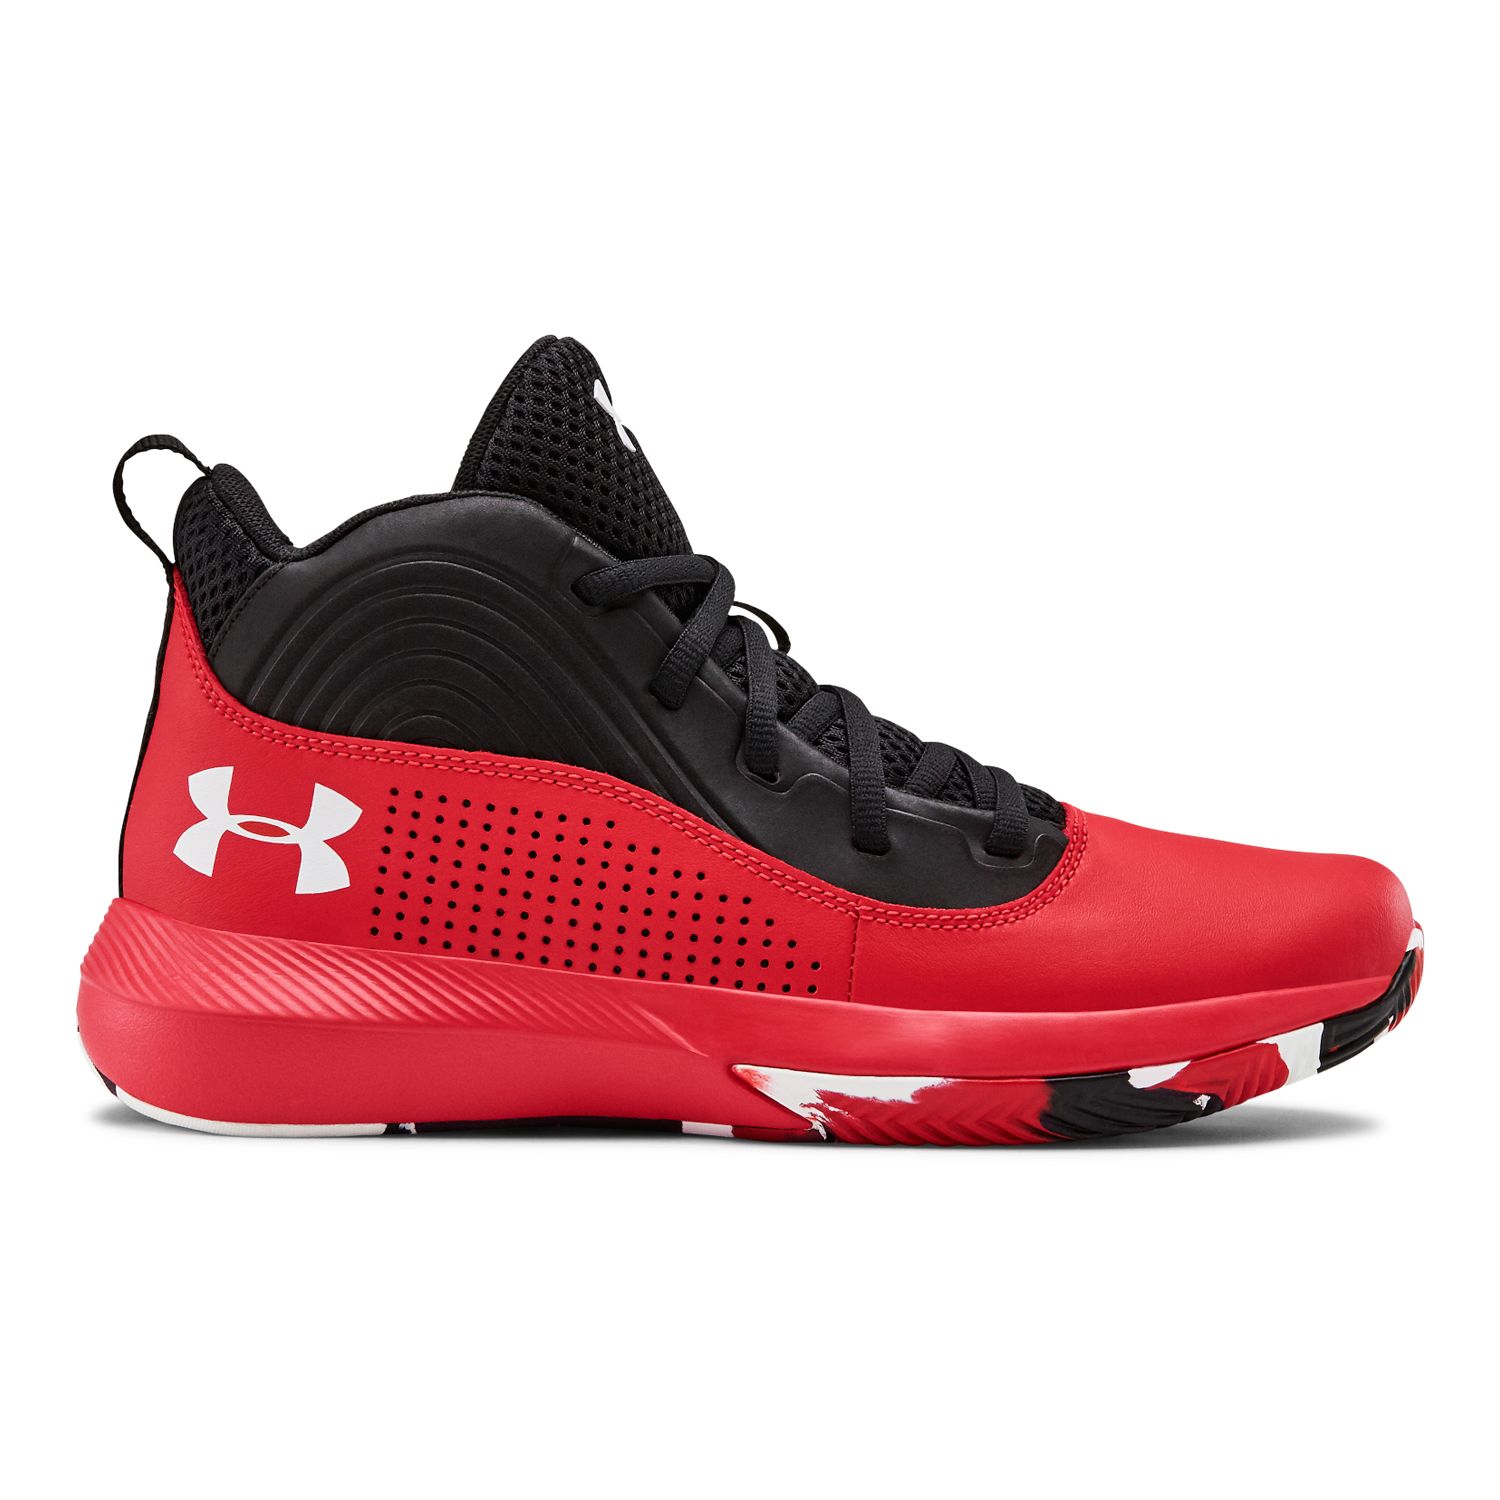 red and white under armour basketball shoes